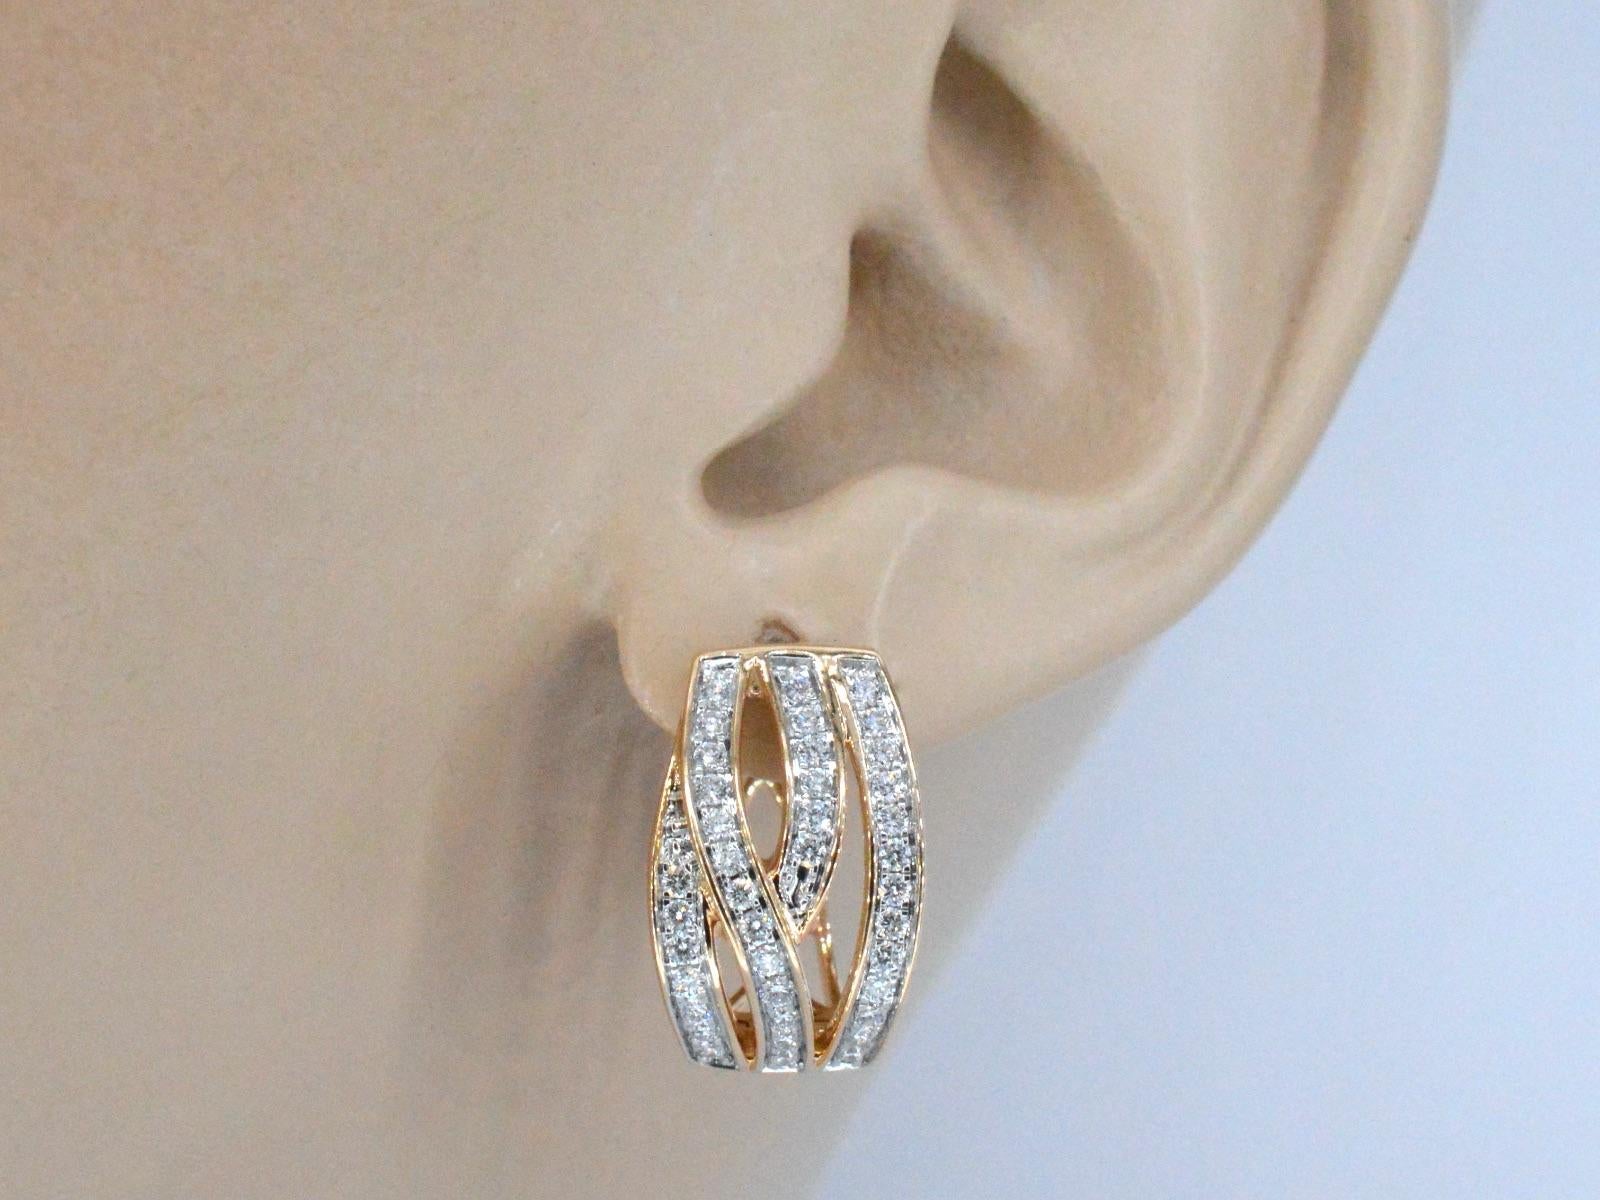 These rose gold earrings are a stunning piece of jewelry that features brilliant-cut diamonds in a unique and stylish design. The diamonds are expertly set in the rose gold to create a seamless and elegant look that catches the eye. The rose gold